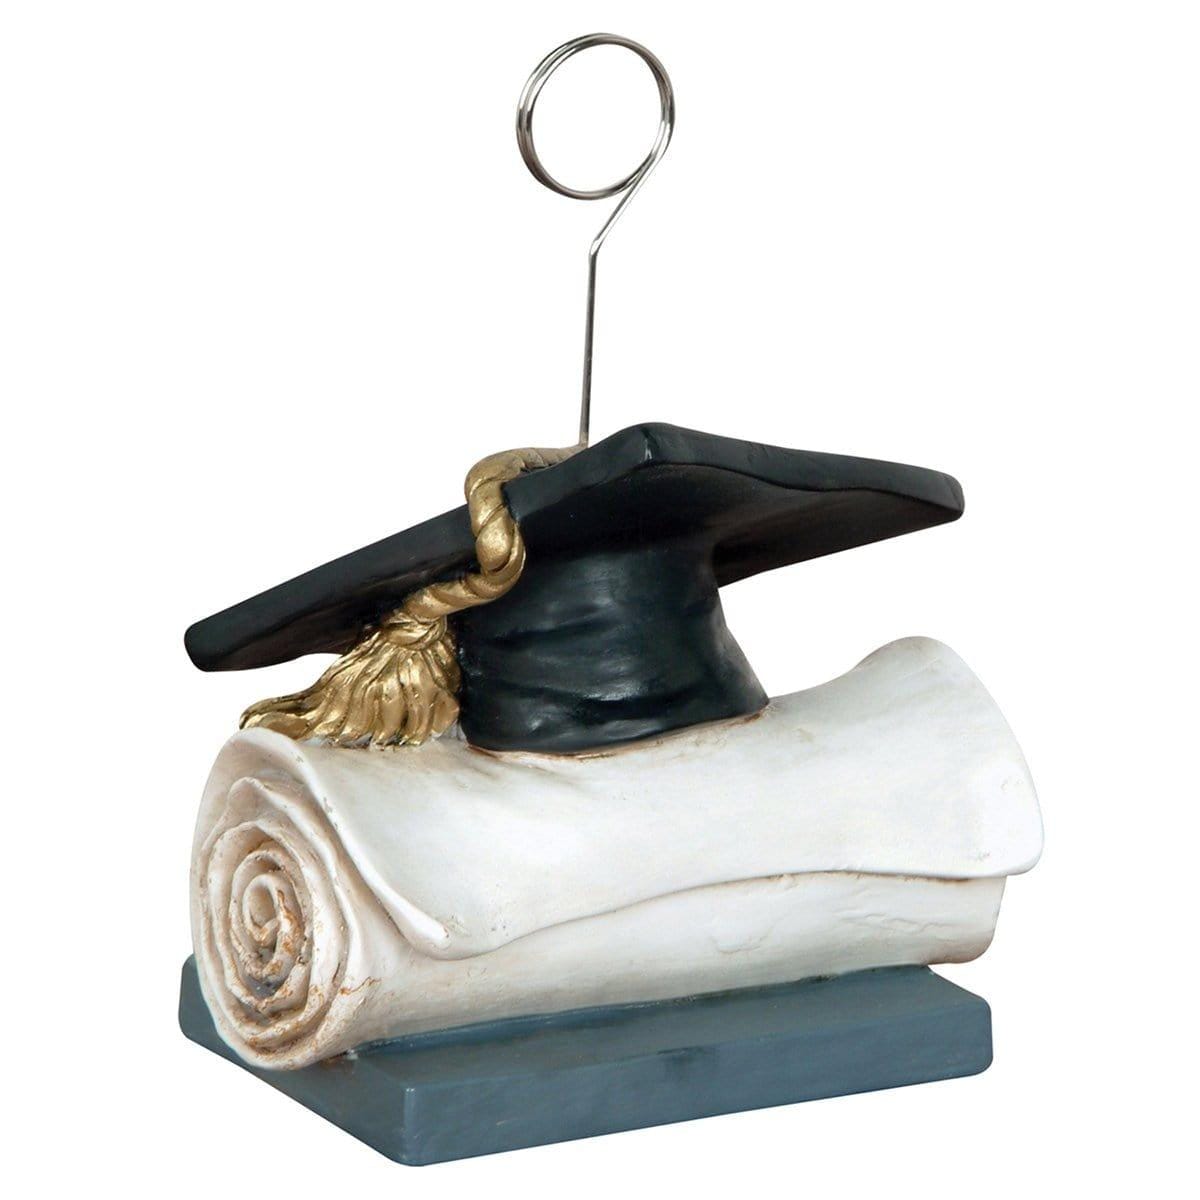 Buy Graduation Balloon Weight/photo Holder - Graduation 6 Oz. sold at Party Expert